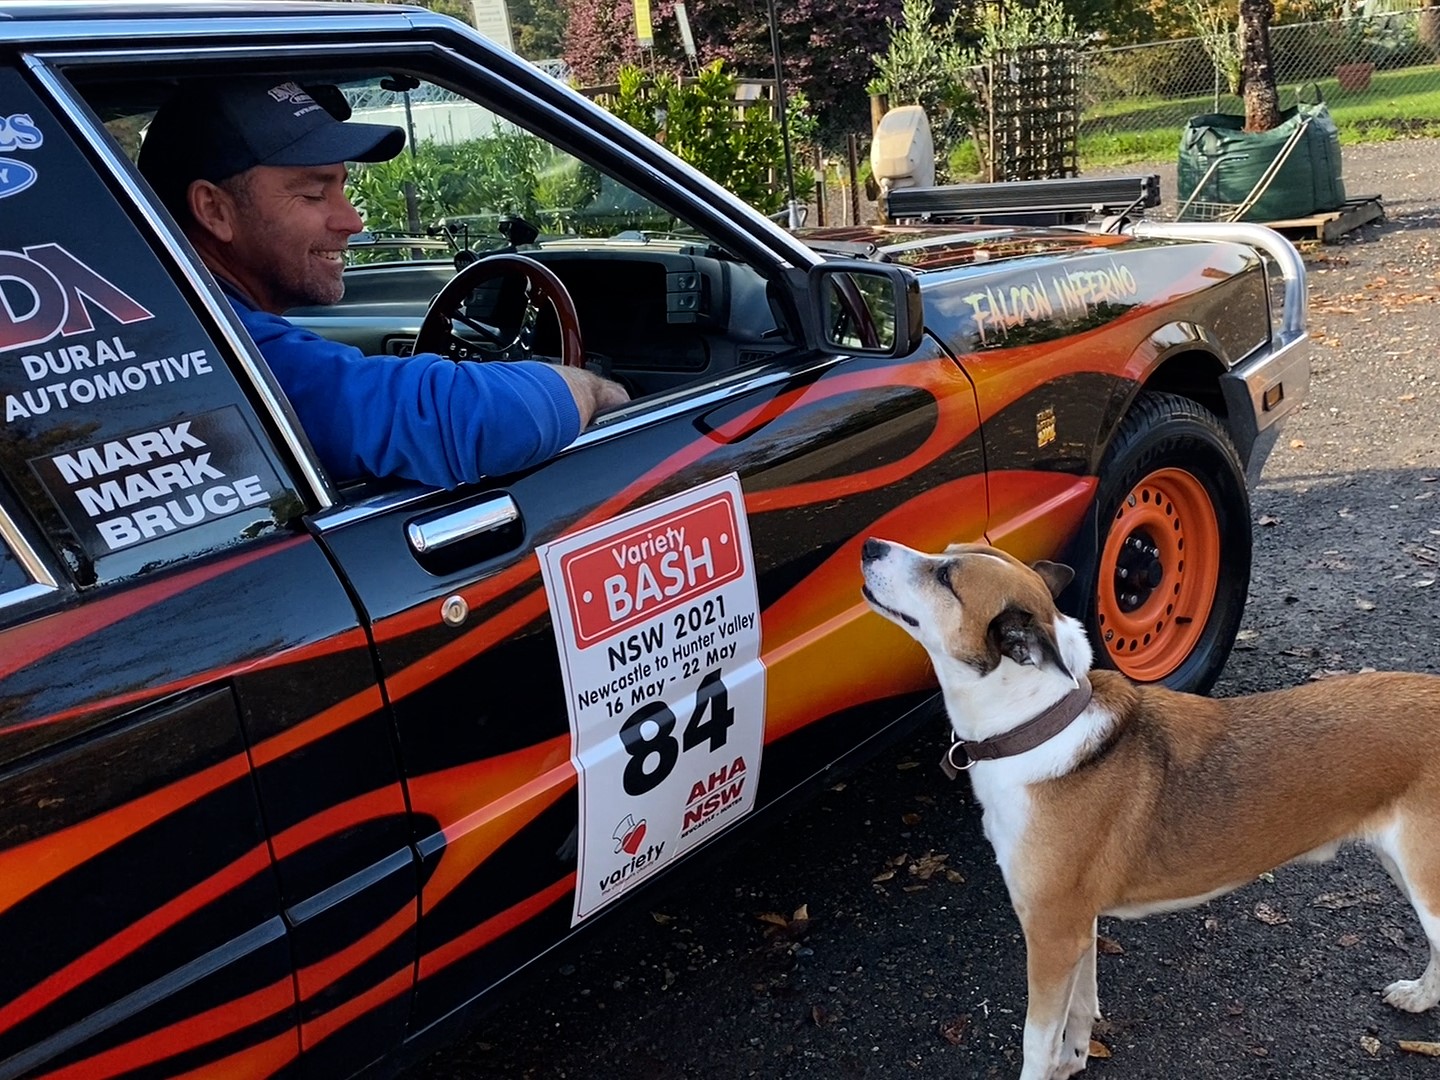 Mark Engall farewells his dog Reggie before taking part in the 2021 Variety Bash